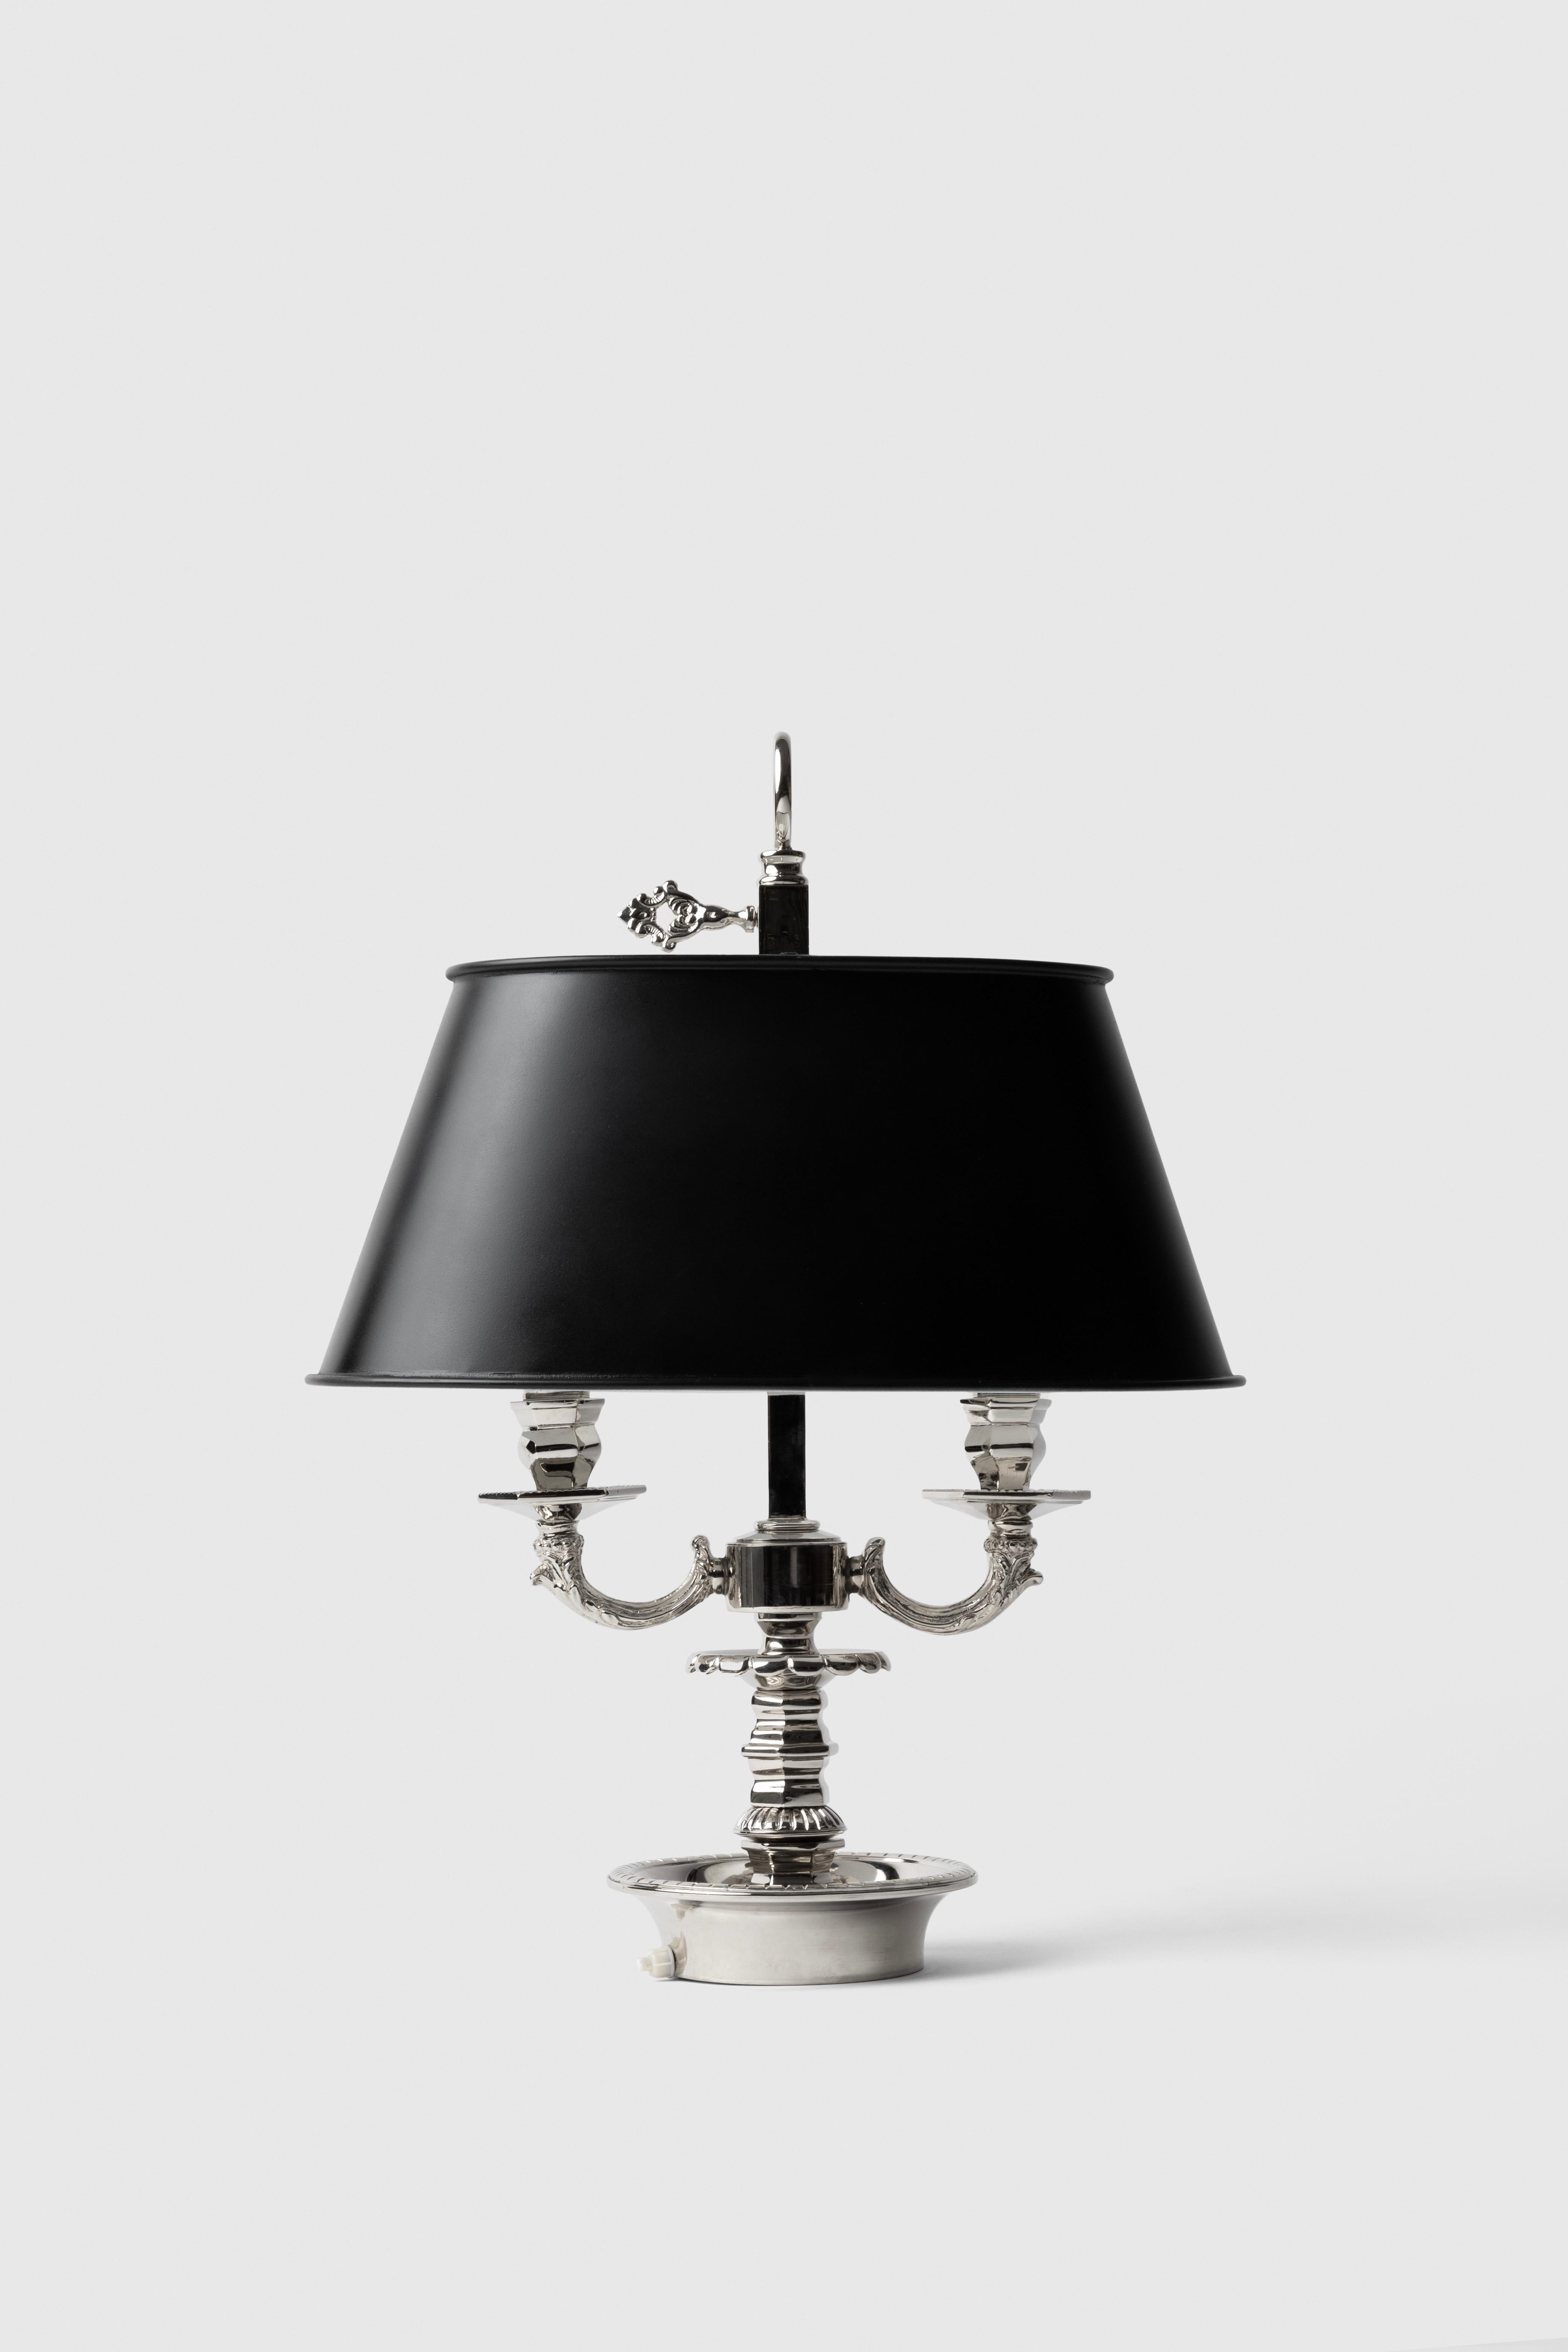 This bronze table lamp is carved in brass with a black leather lampshade, two arms and carved details. 

It is in the style of a 19th century Louis XVI Bouillotte lamp and the designs in the arms and top details are inspired by the study and